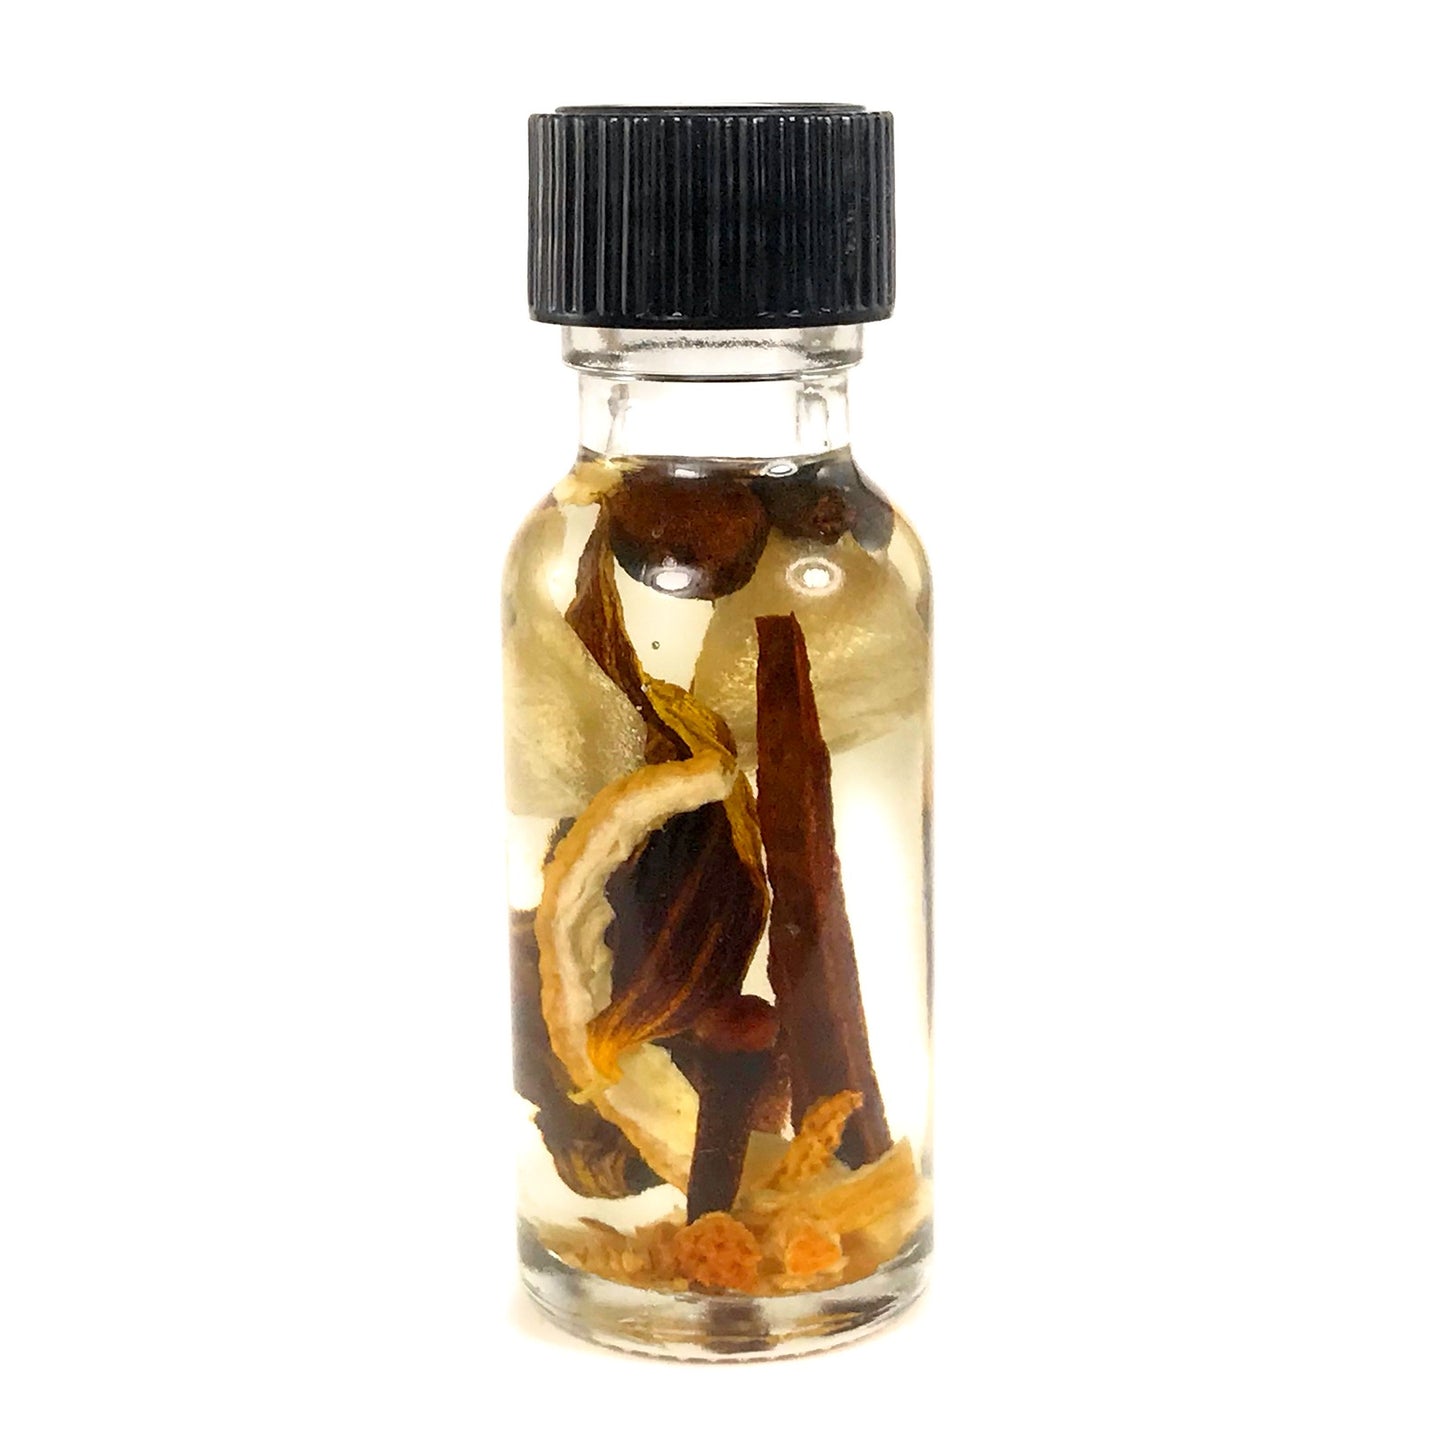 Twichery Abundance & Prosperity Oil: Welcome the abundance of the Universe into your life. Twichery Abundance & Prosperity Oil awakens your sense of destiny and your ability to pursue it!